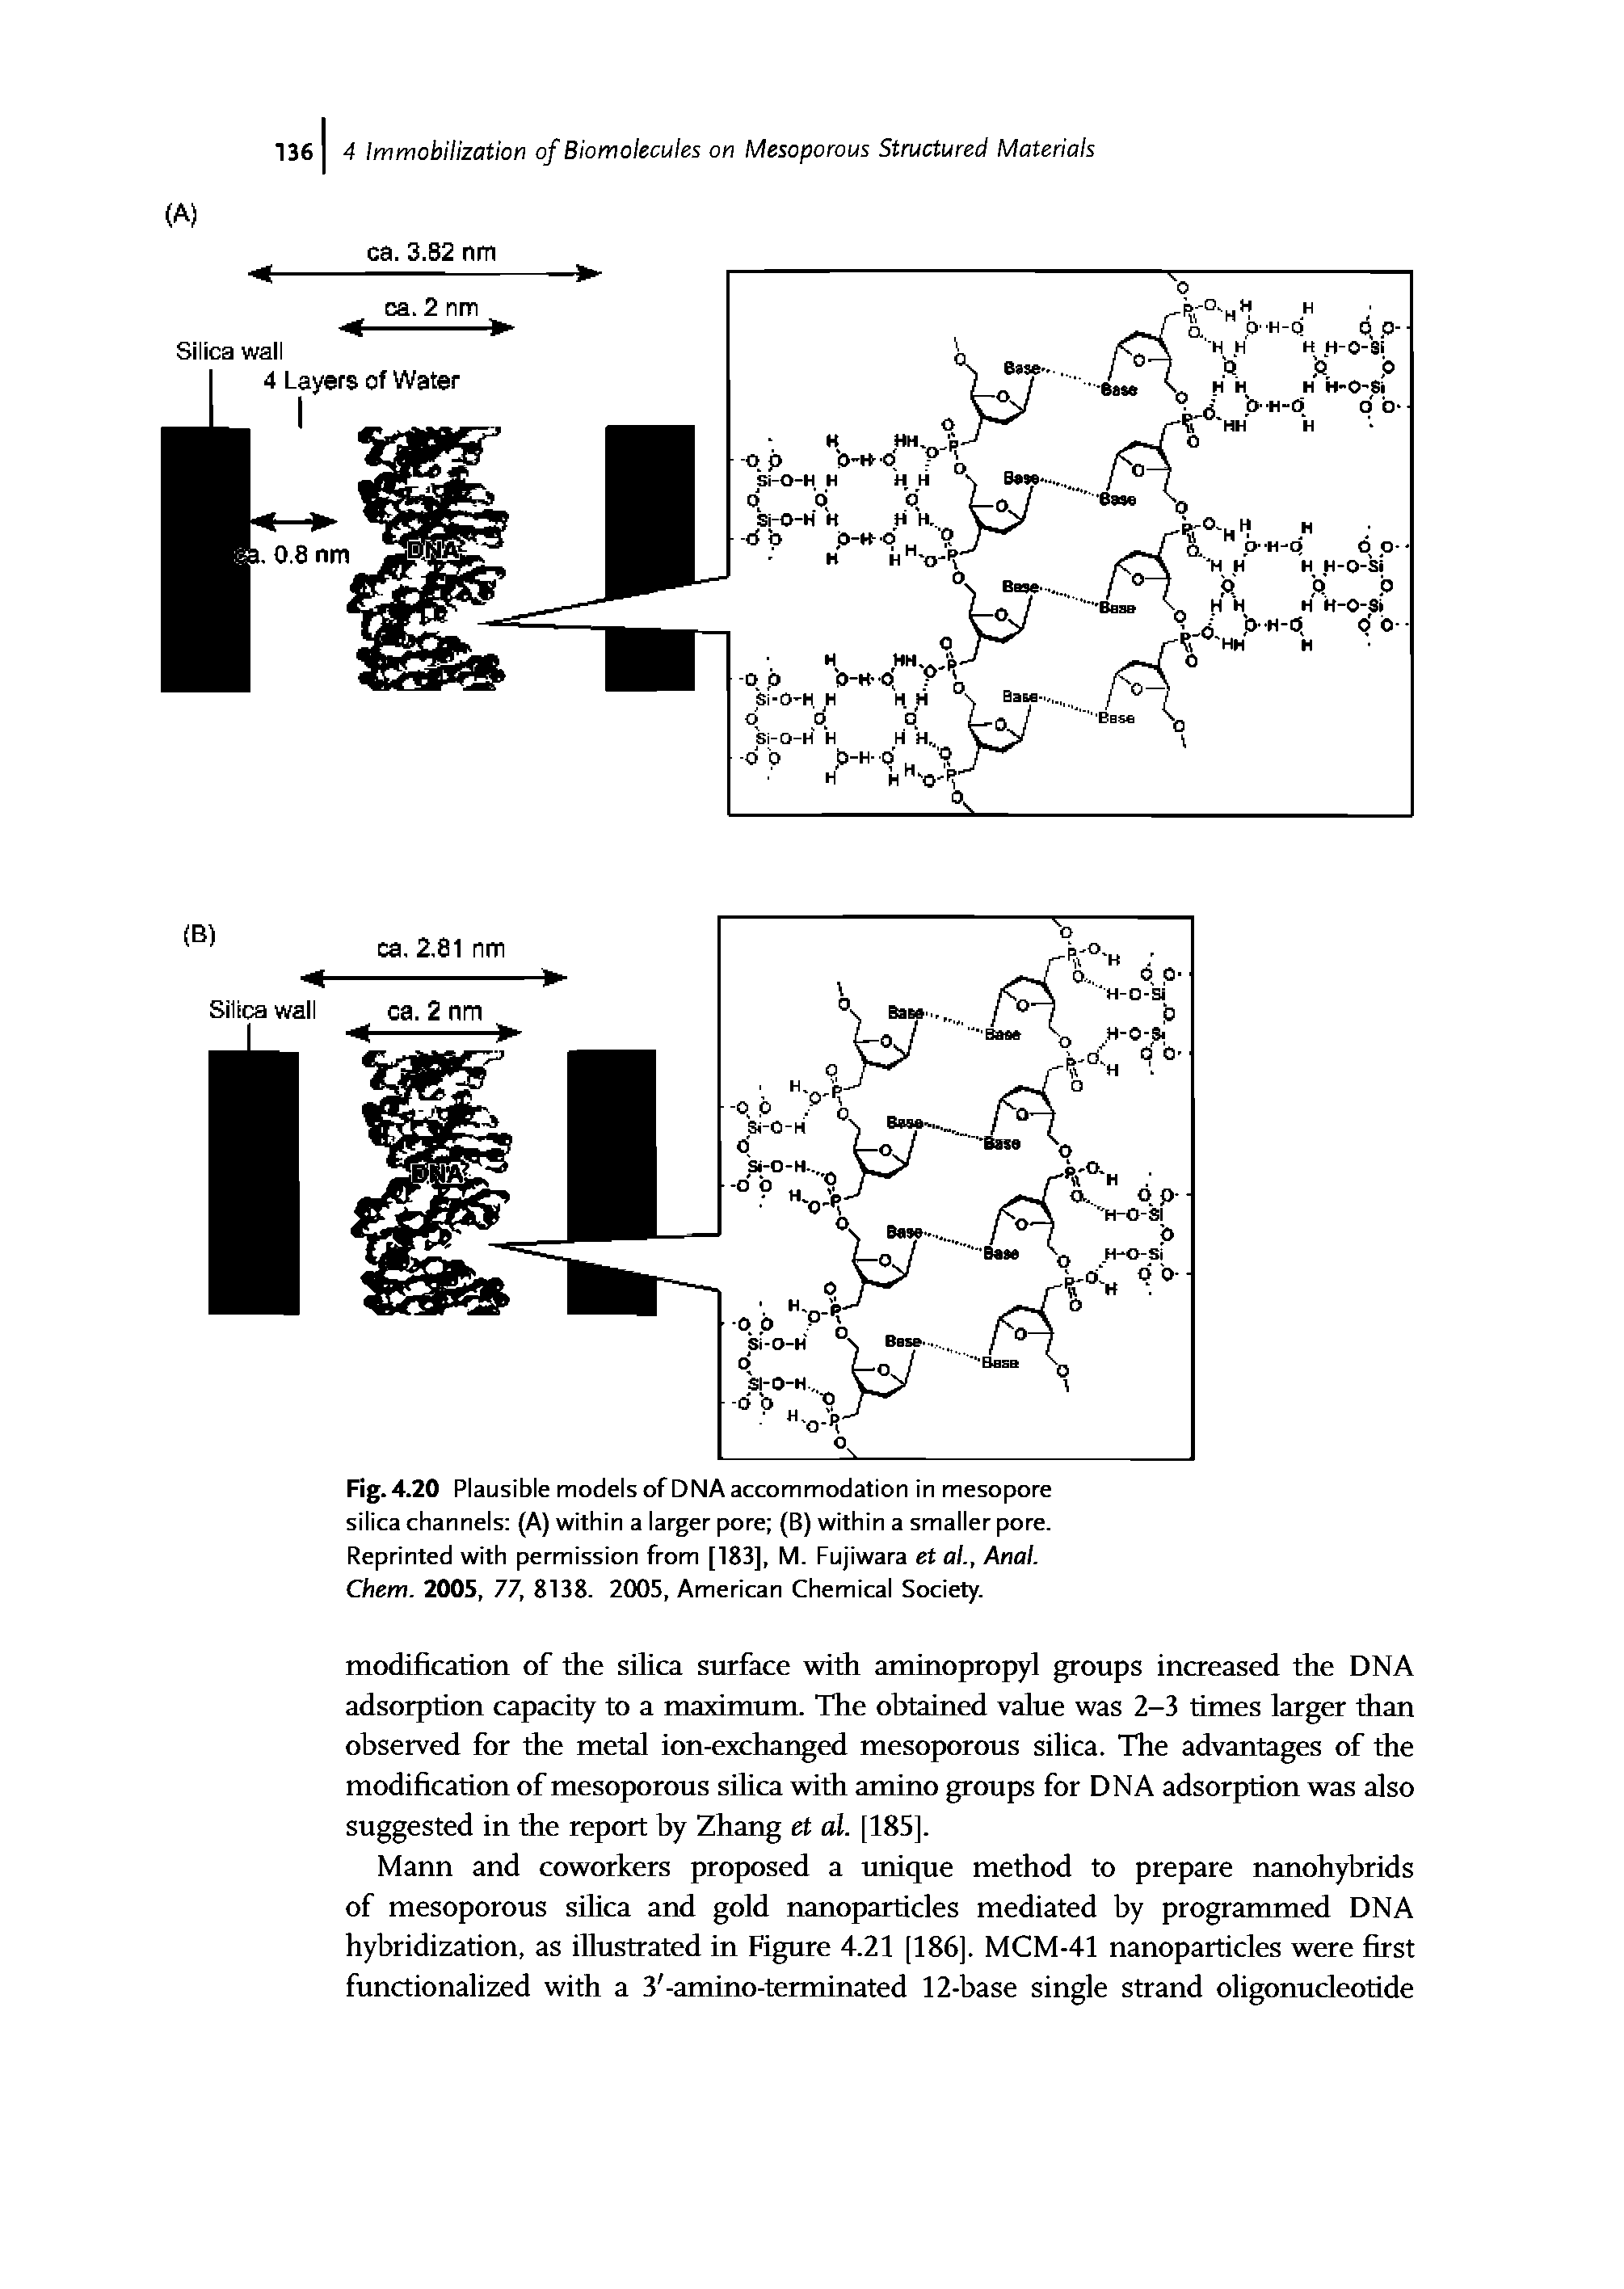 Fig. 4.20 Plausible models of DNA accommodation in mesopore silica channels (A) within a larger pore (B) within a smaller pore.